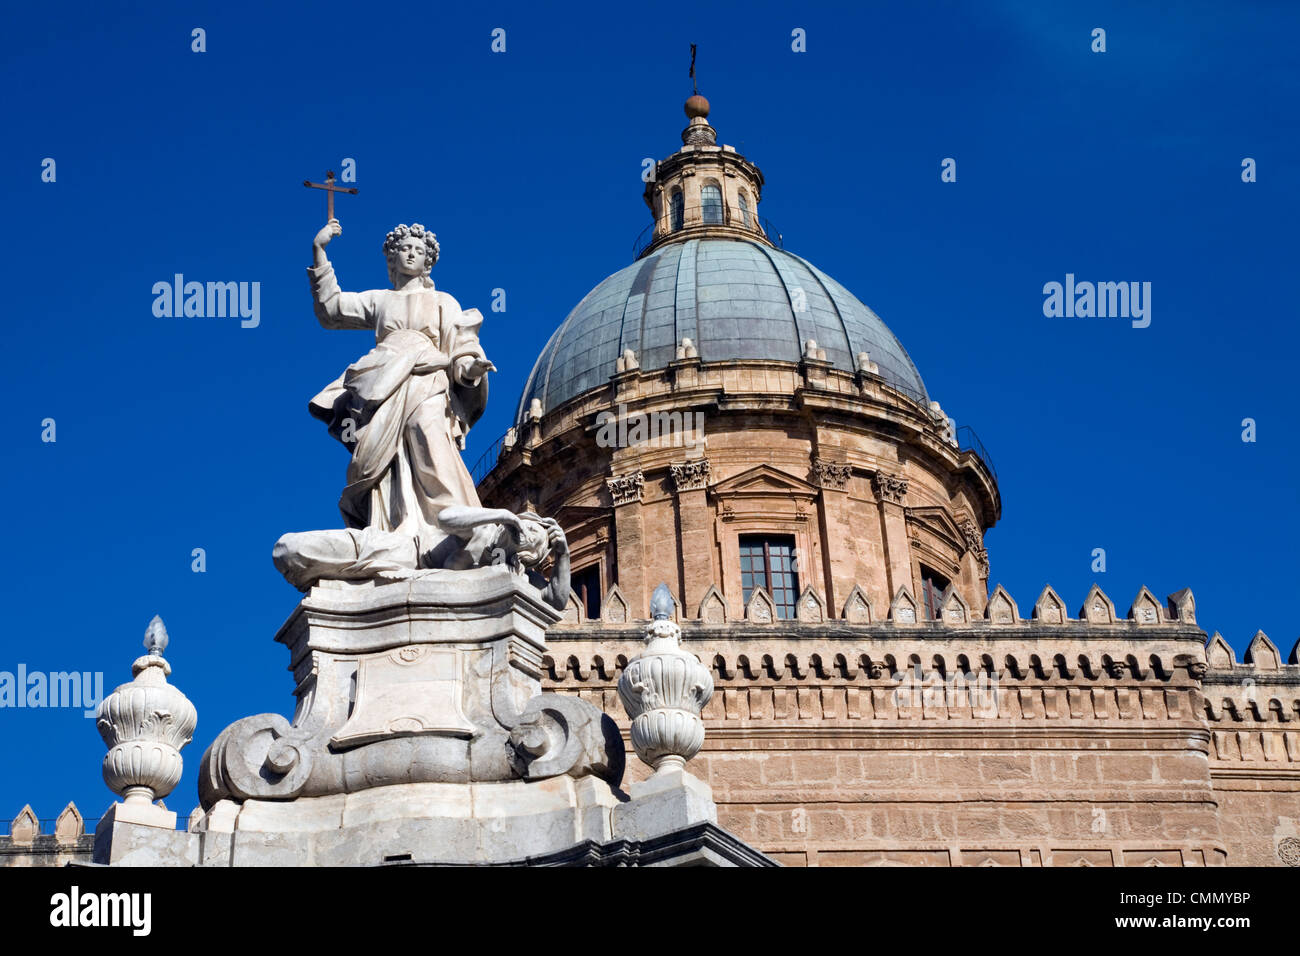 Dome of the Cattedrale (cathedral), Palermo, Sicily, Italy, Europe Stock Photo